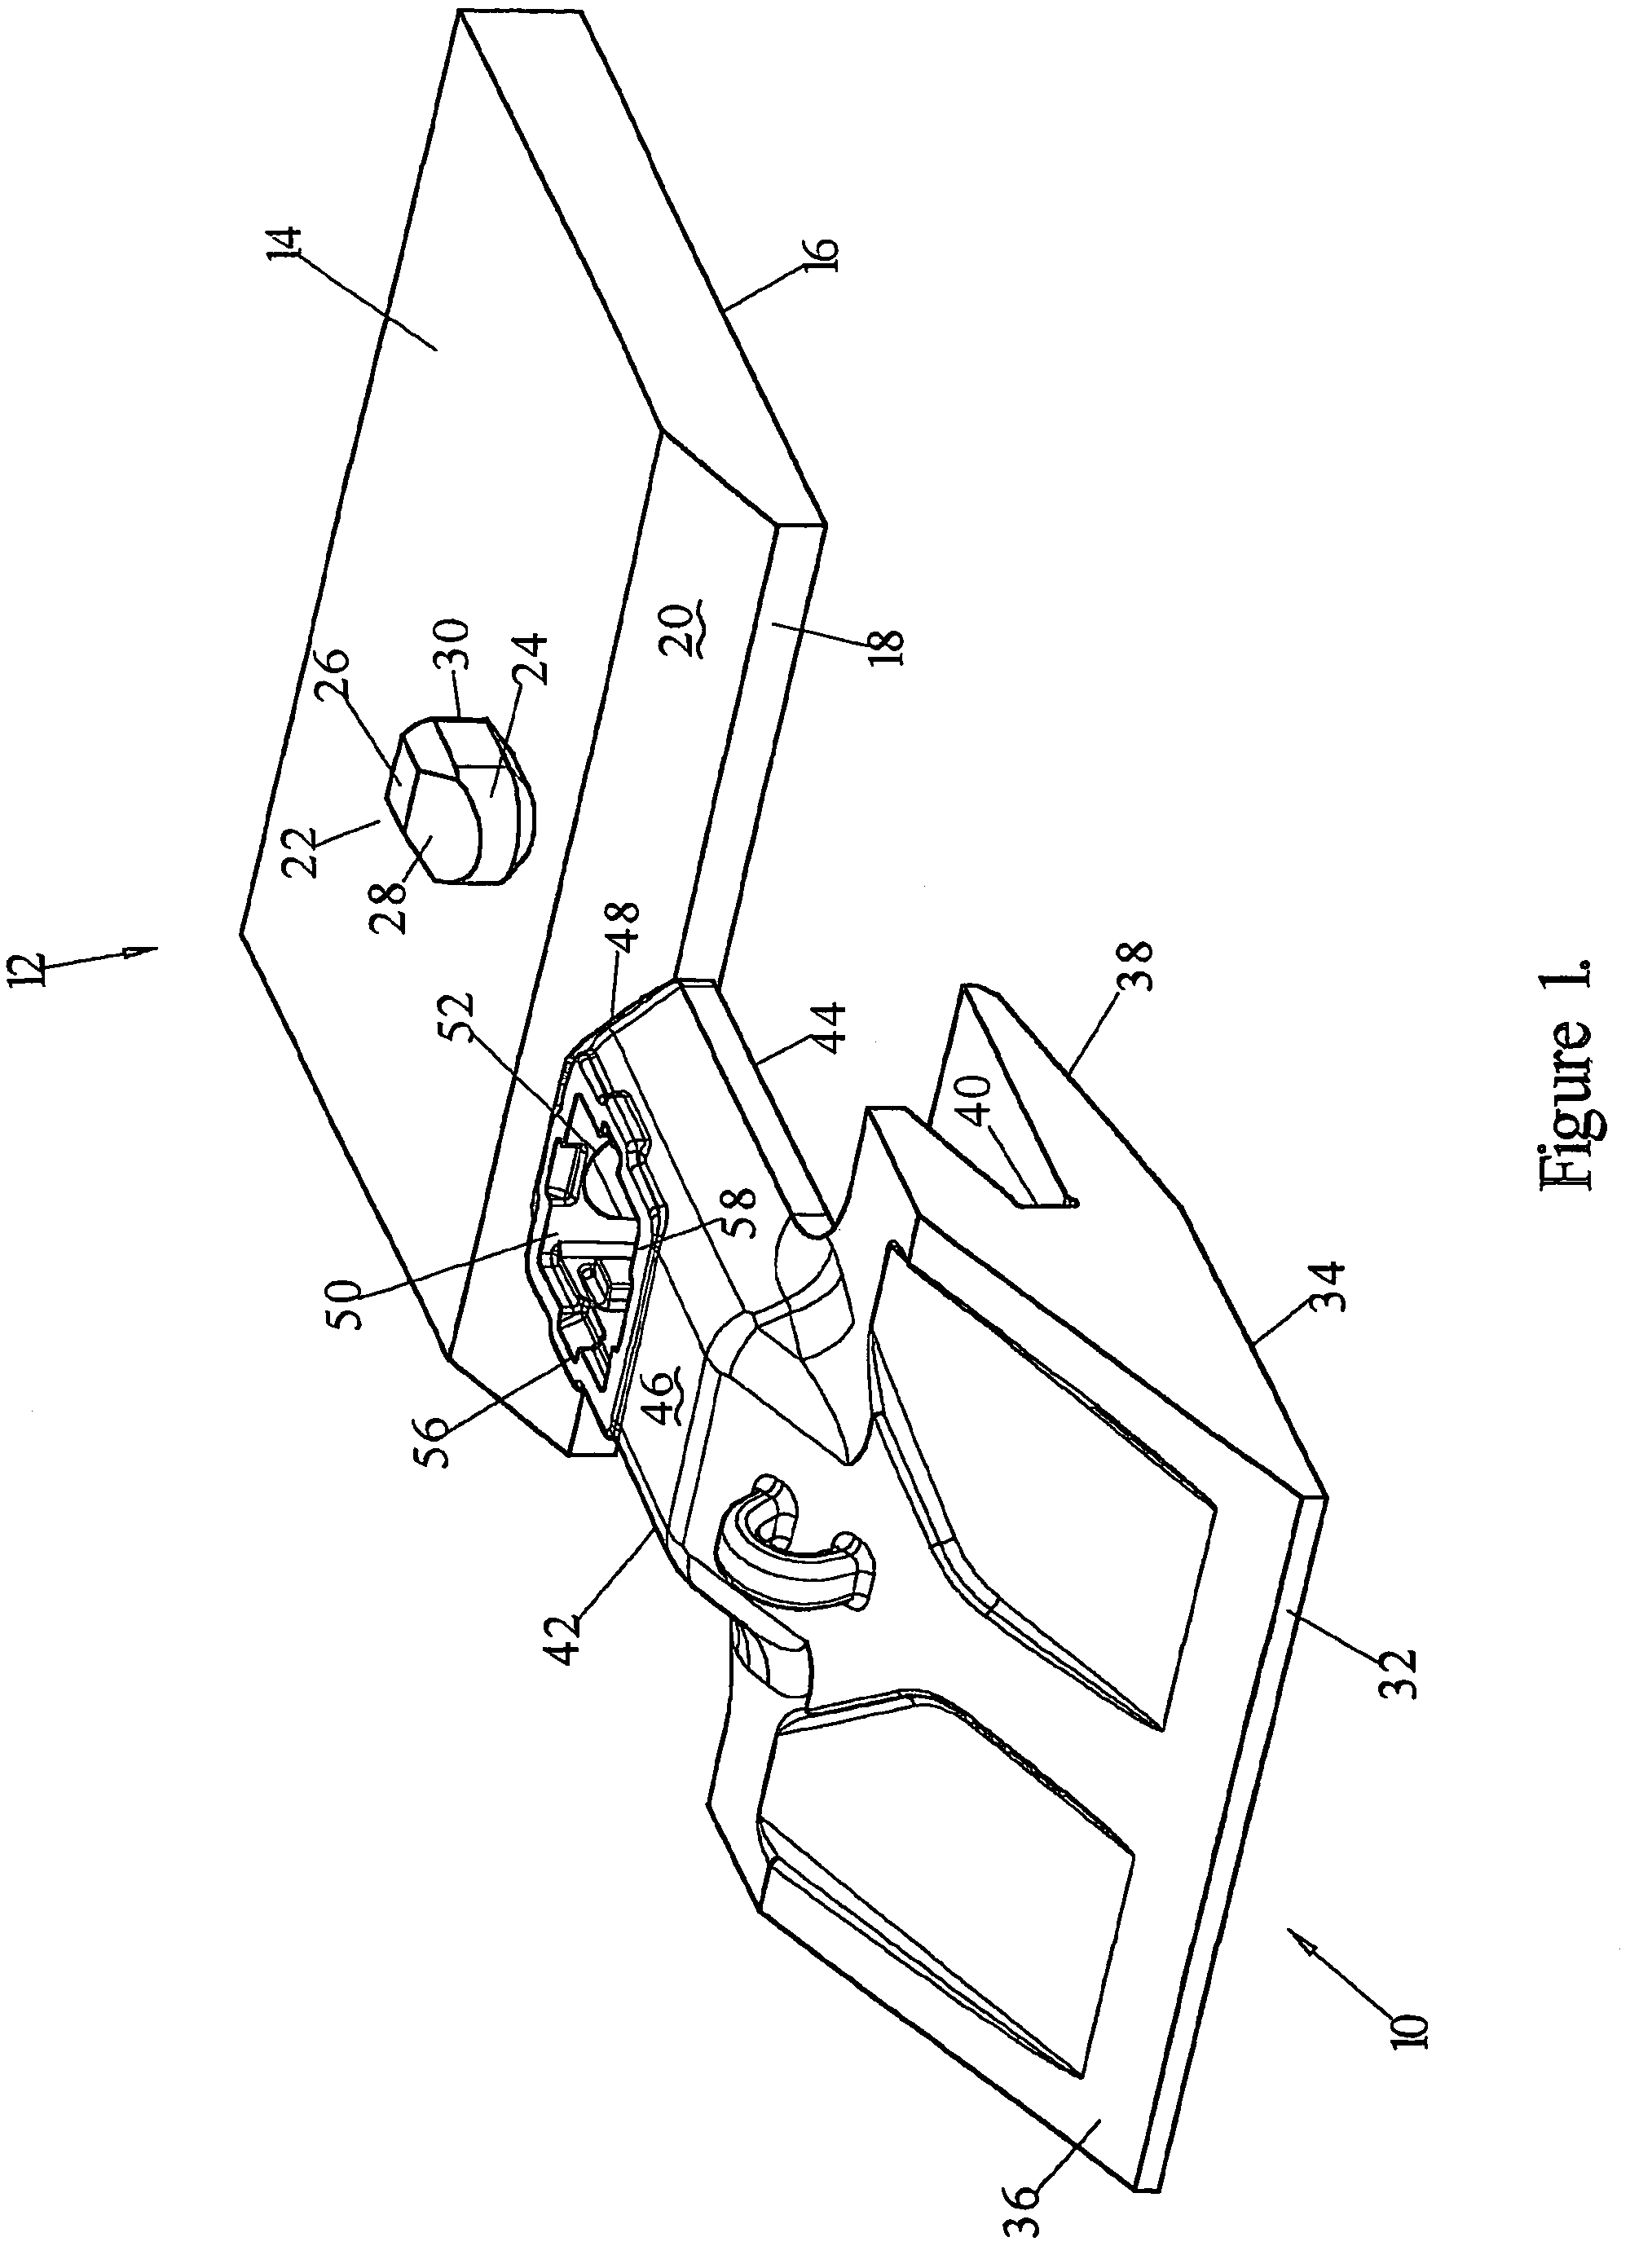 Attachment system